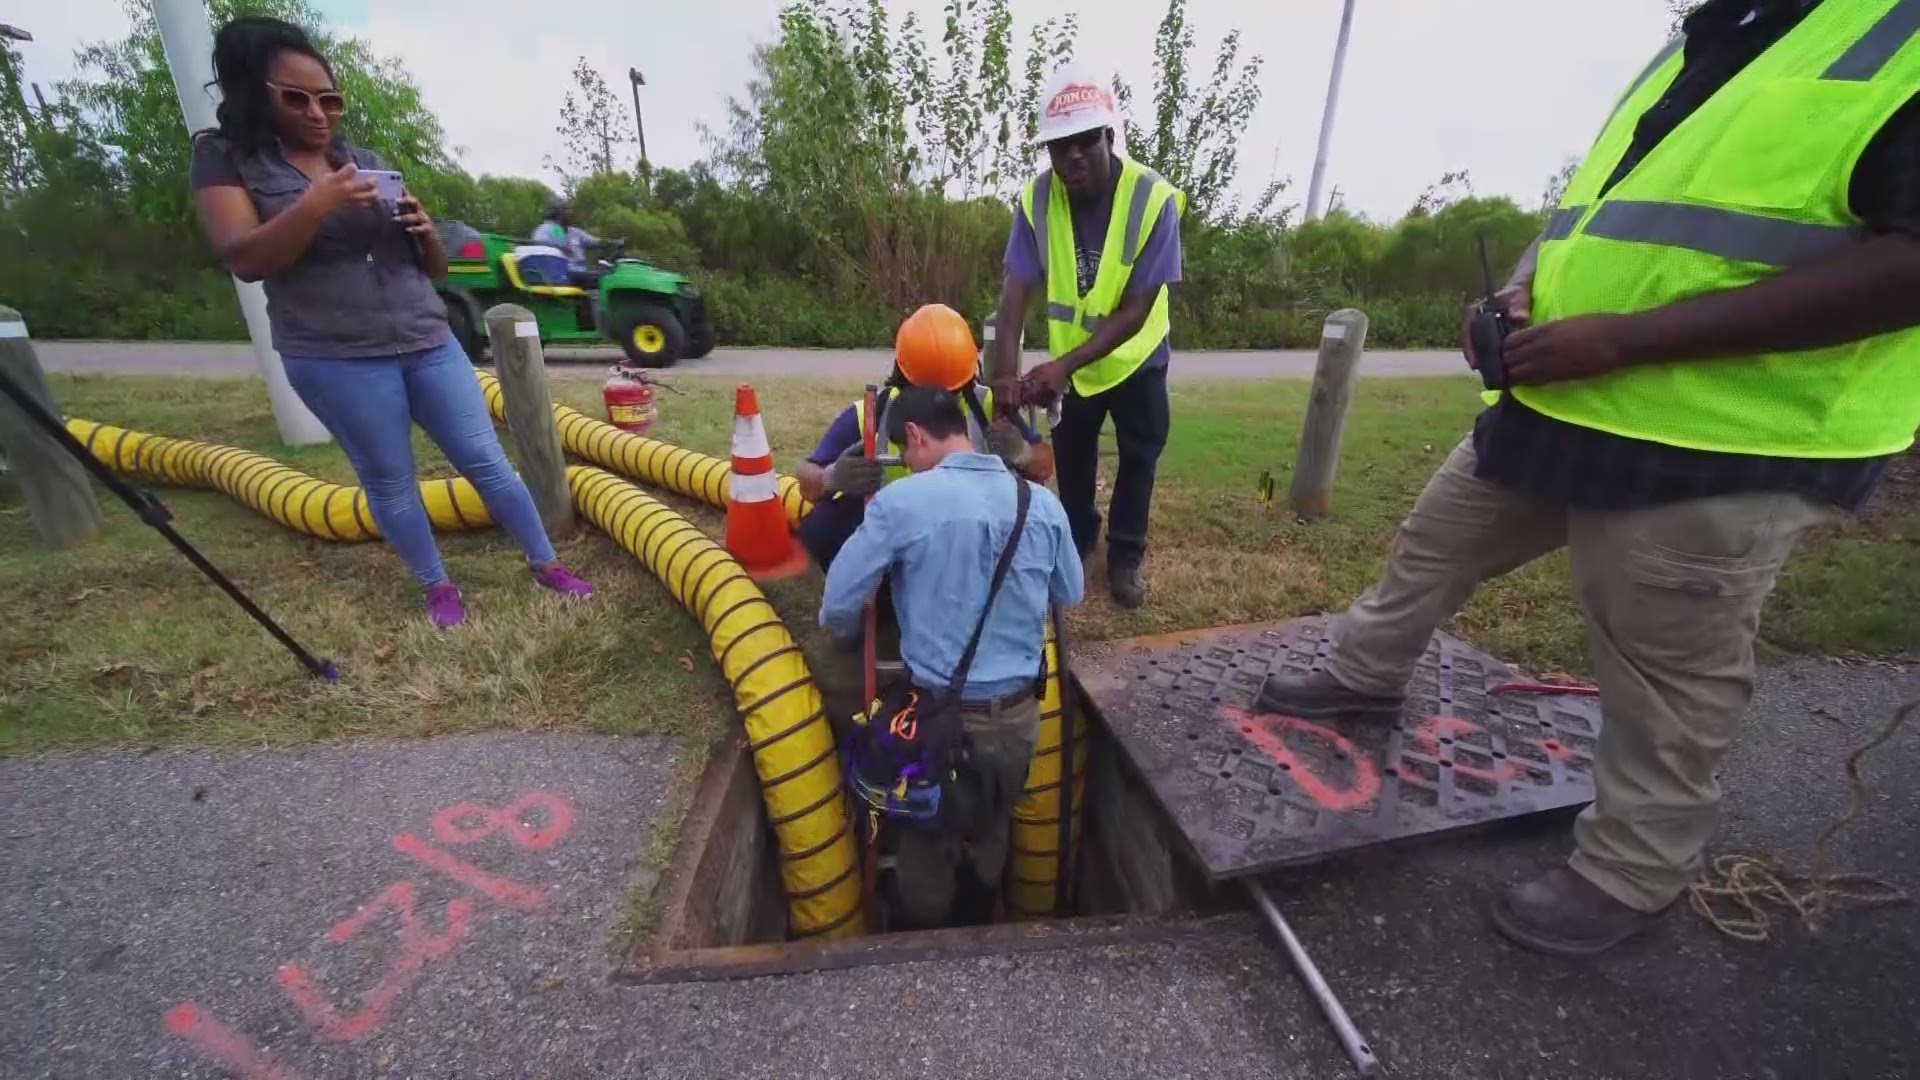 What we saw underground only scratches the surface of New Orleans' drainage problem